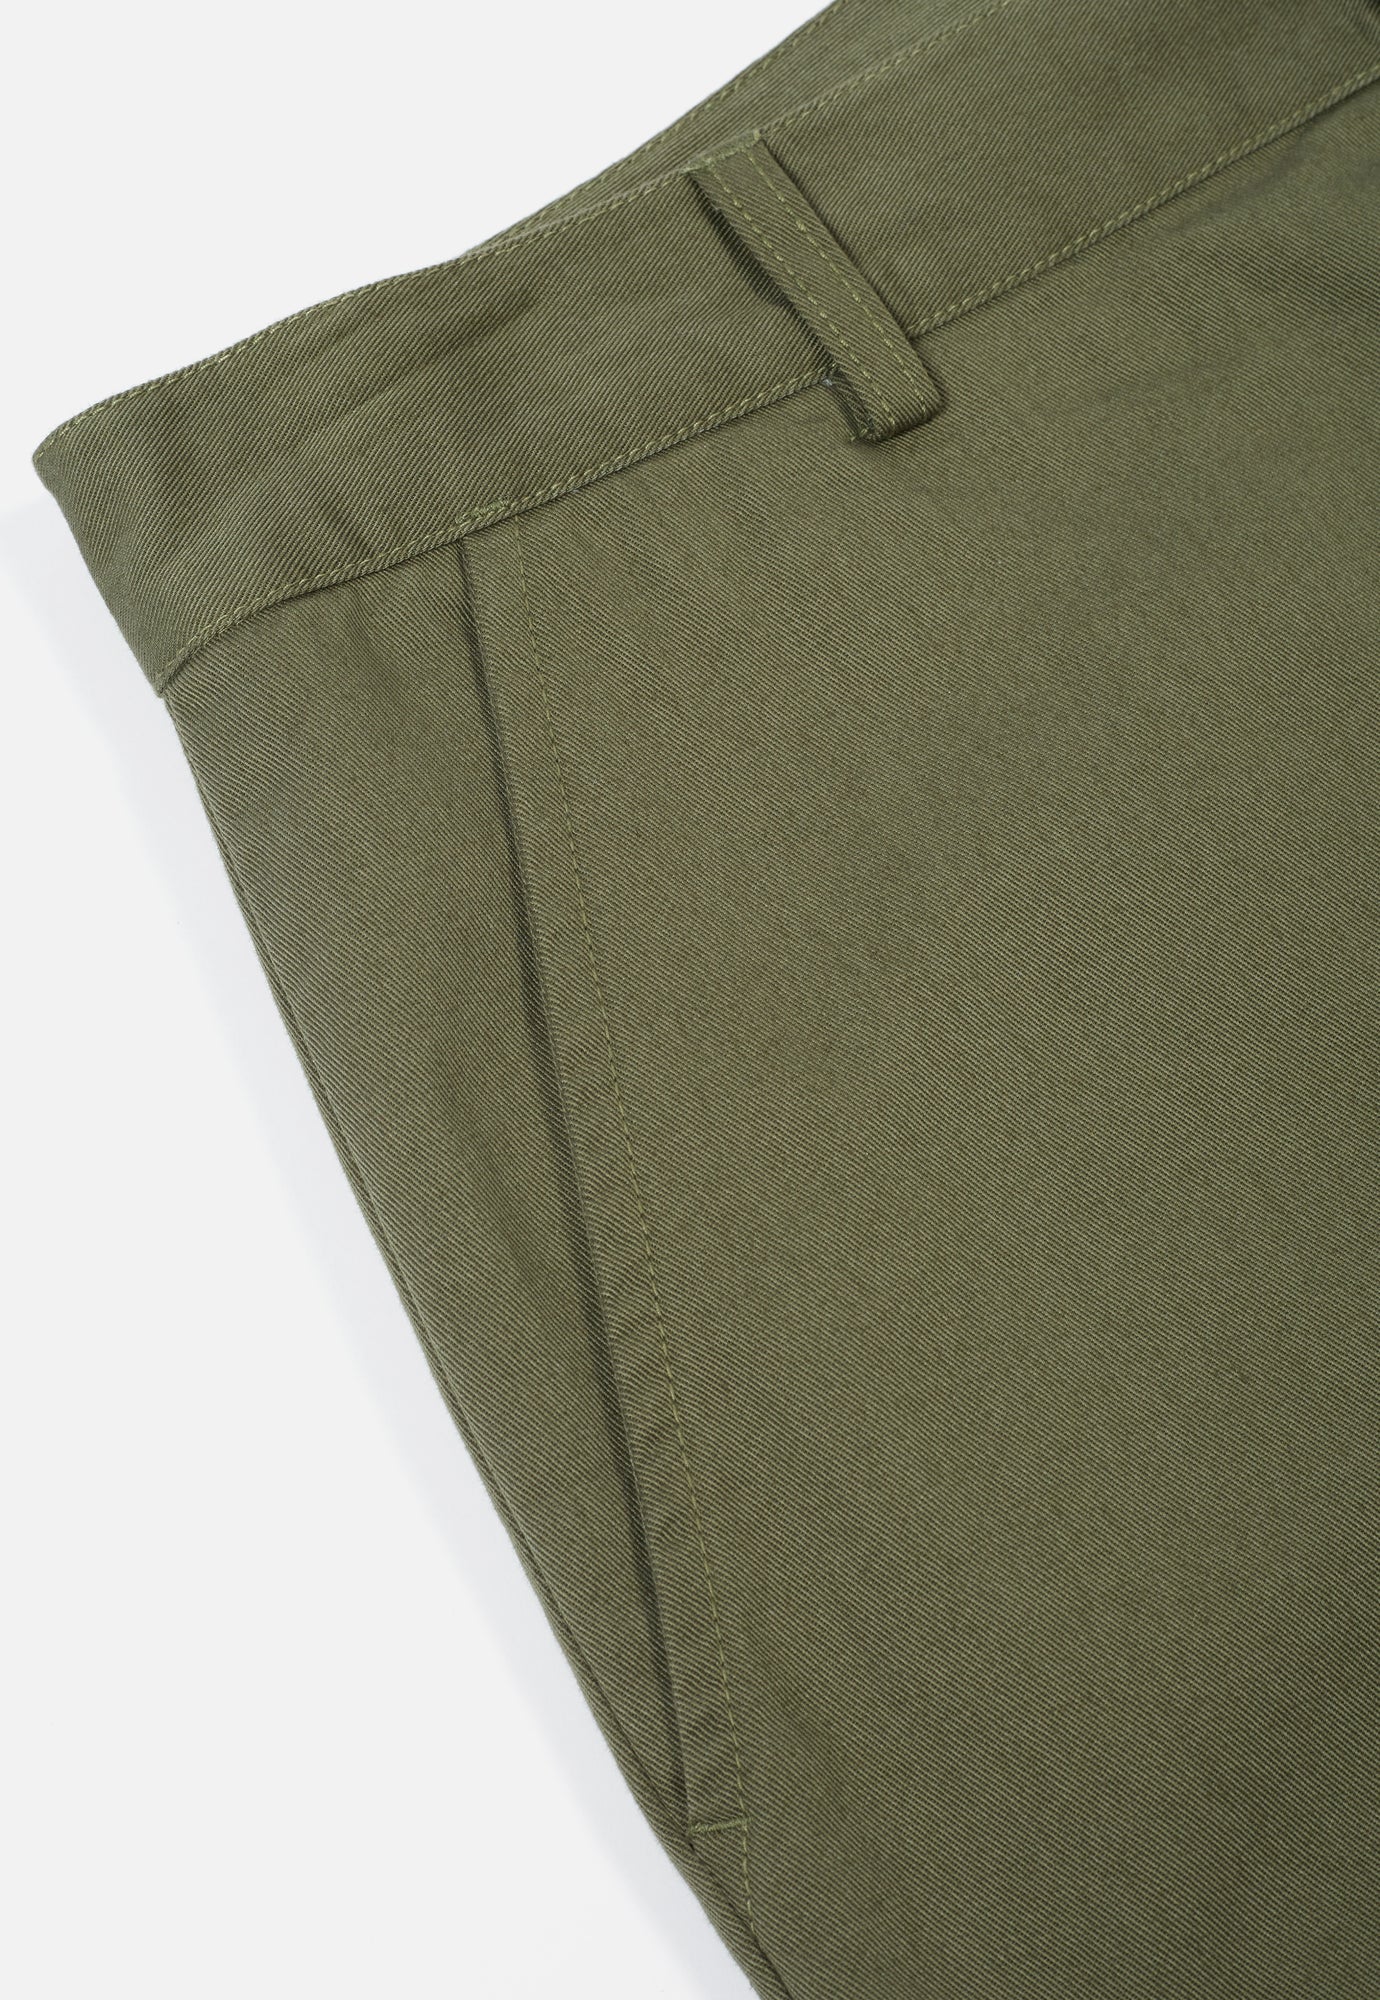 Universal Works Military Chino in Light Olive Twill